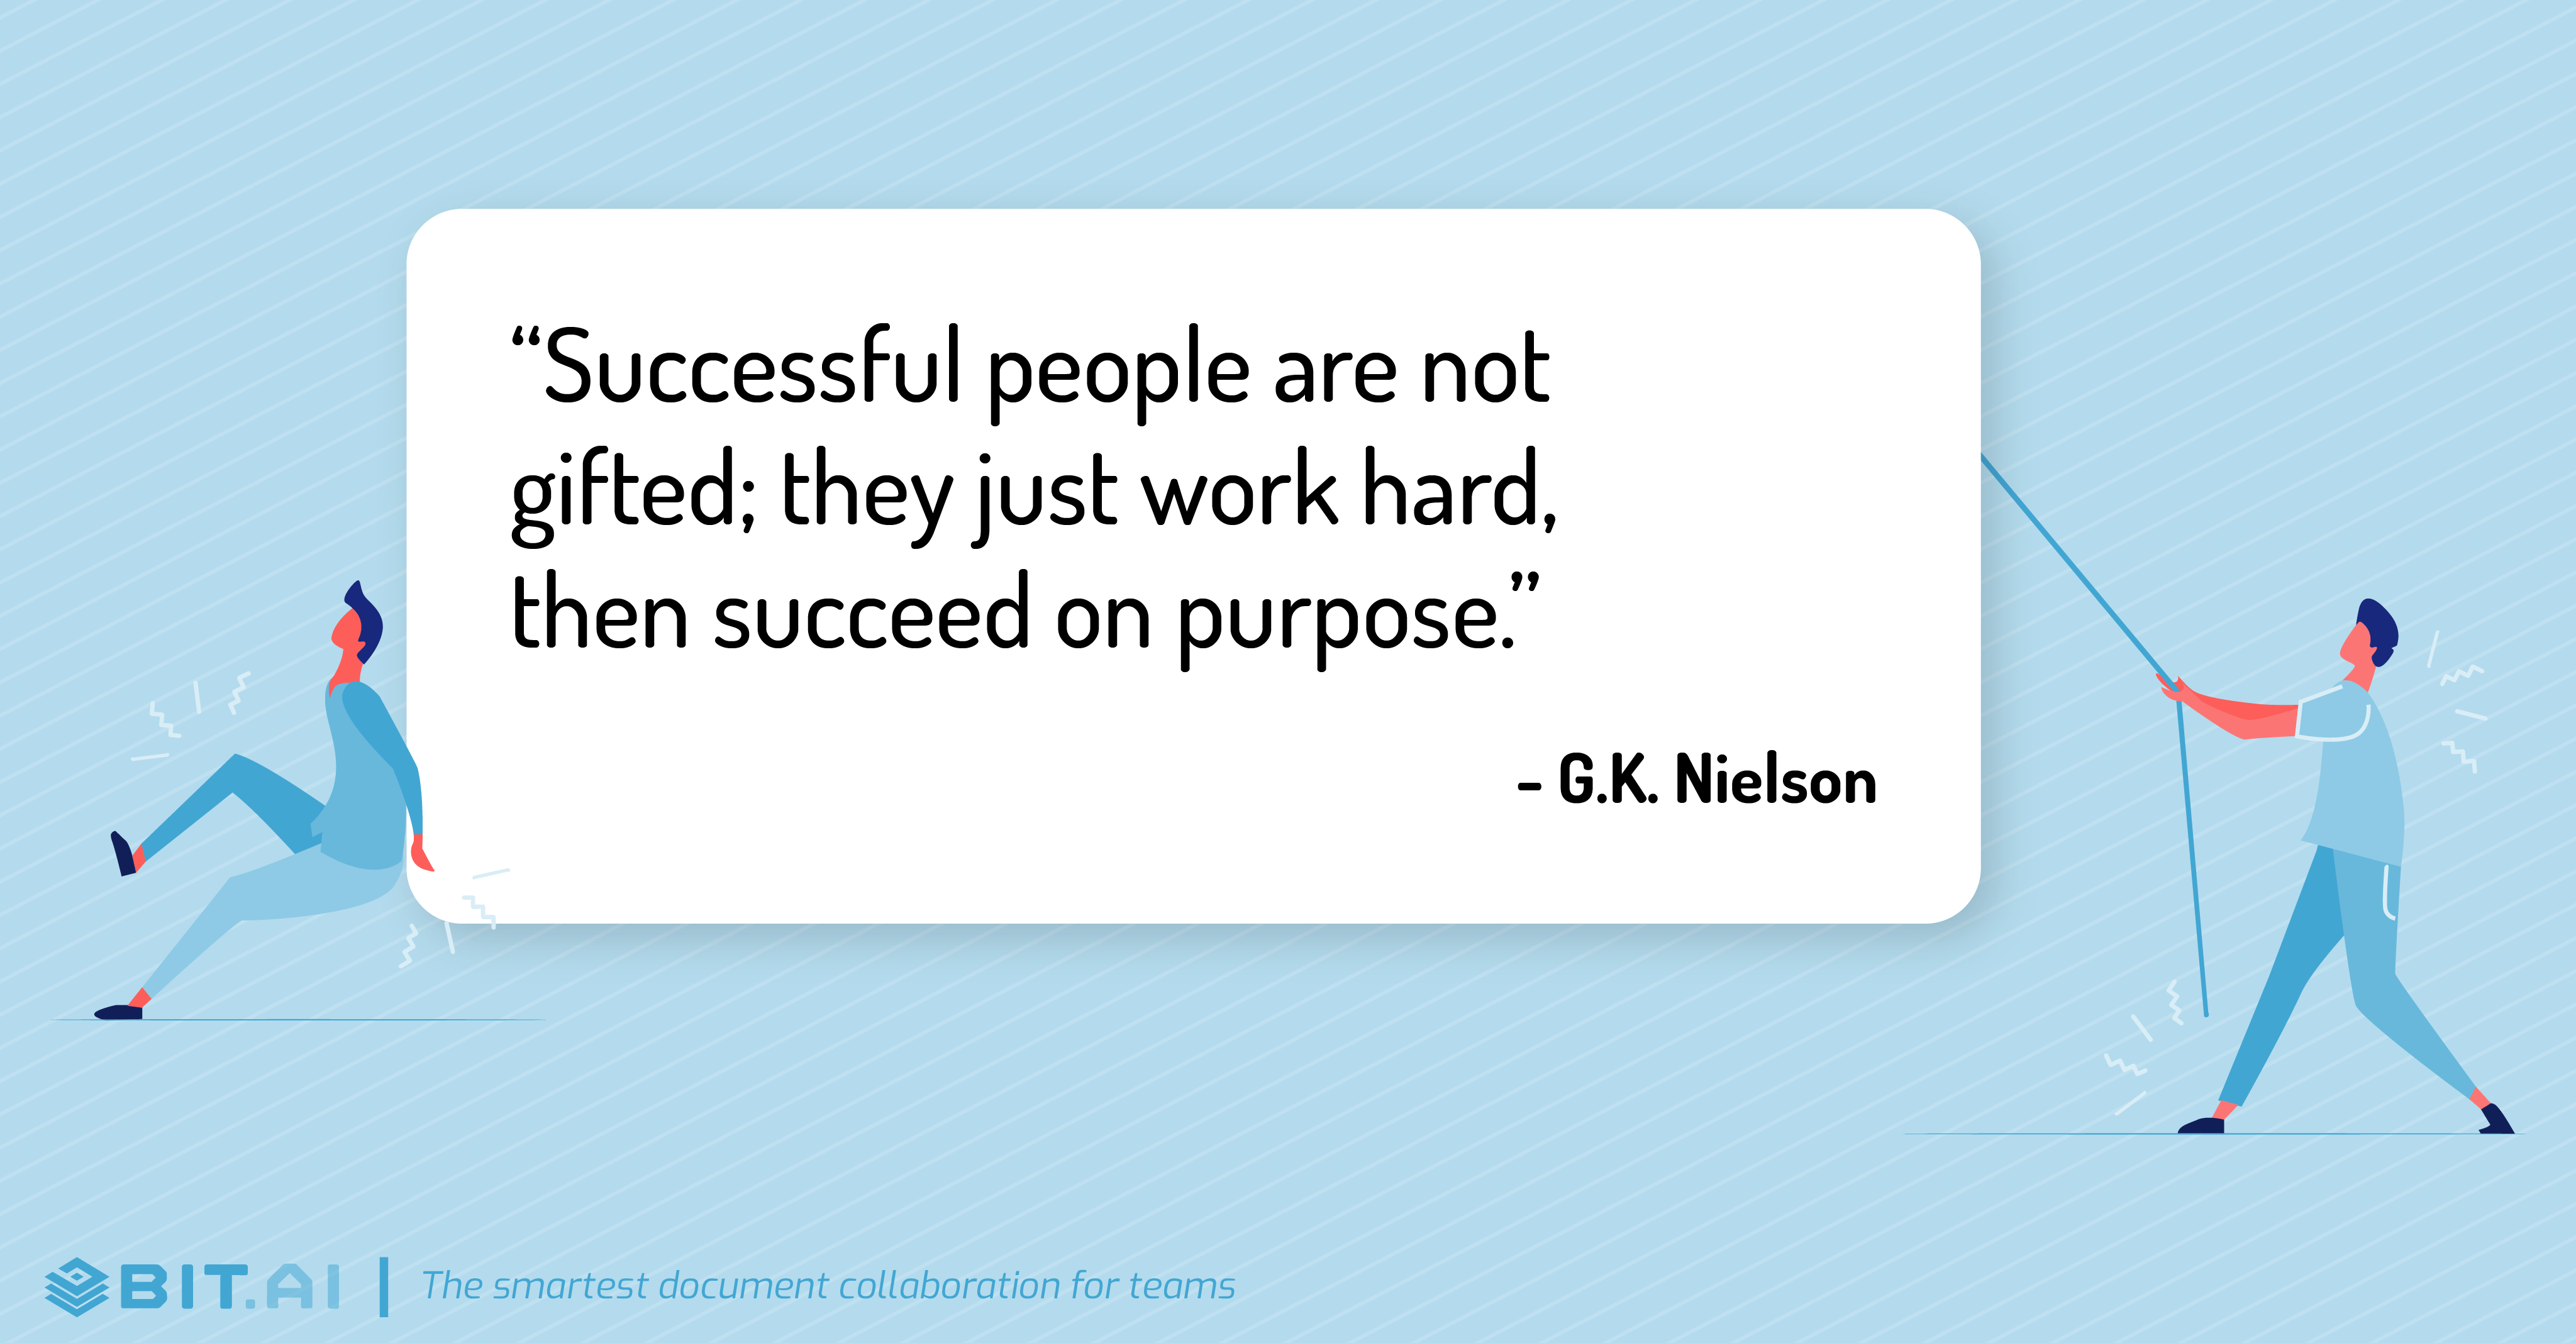 Hard work quote by G.K. Nielson